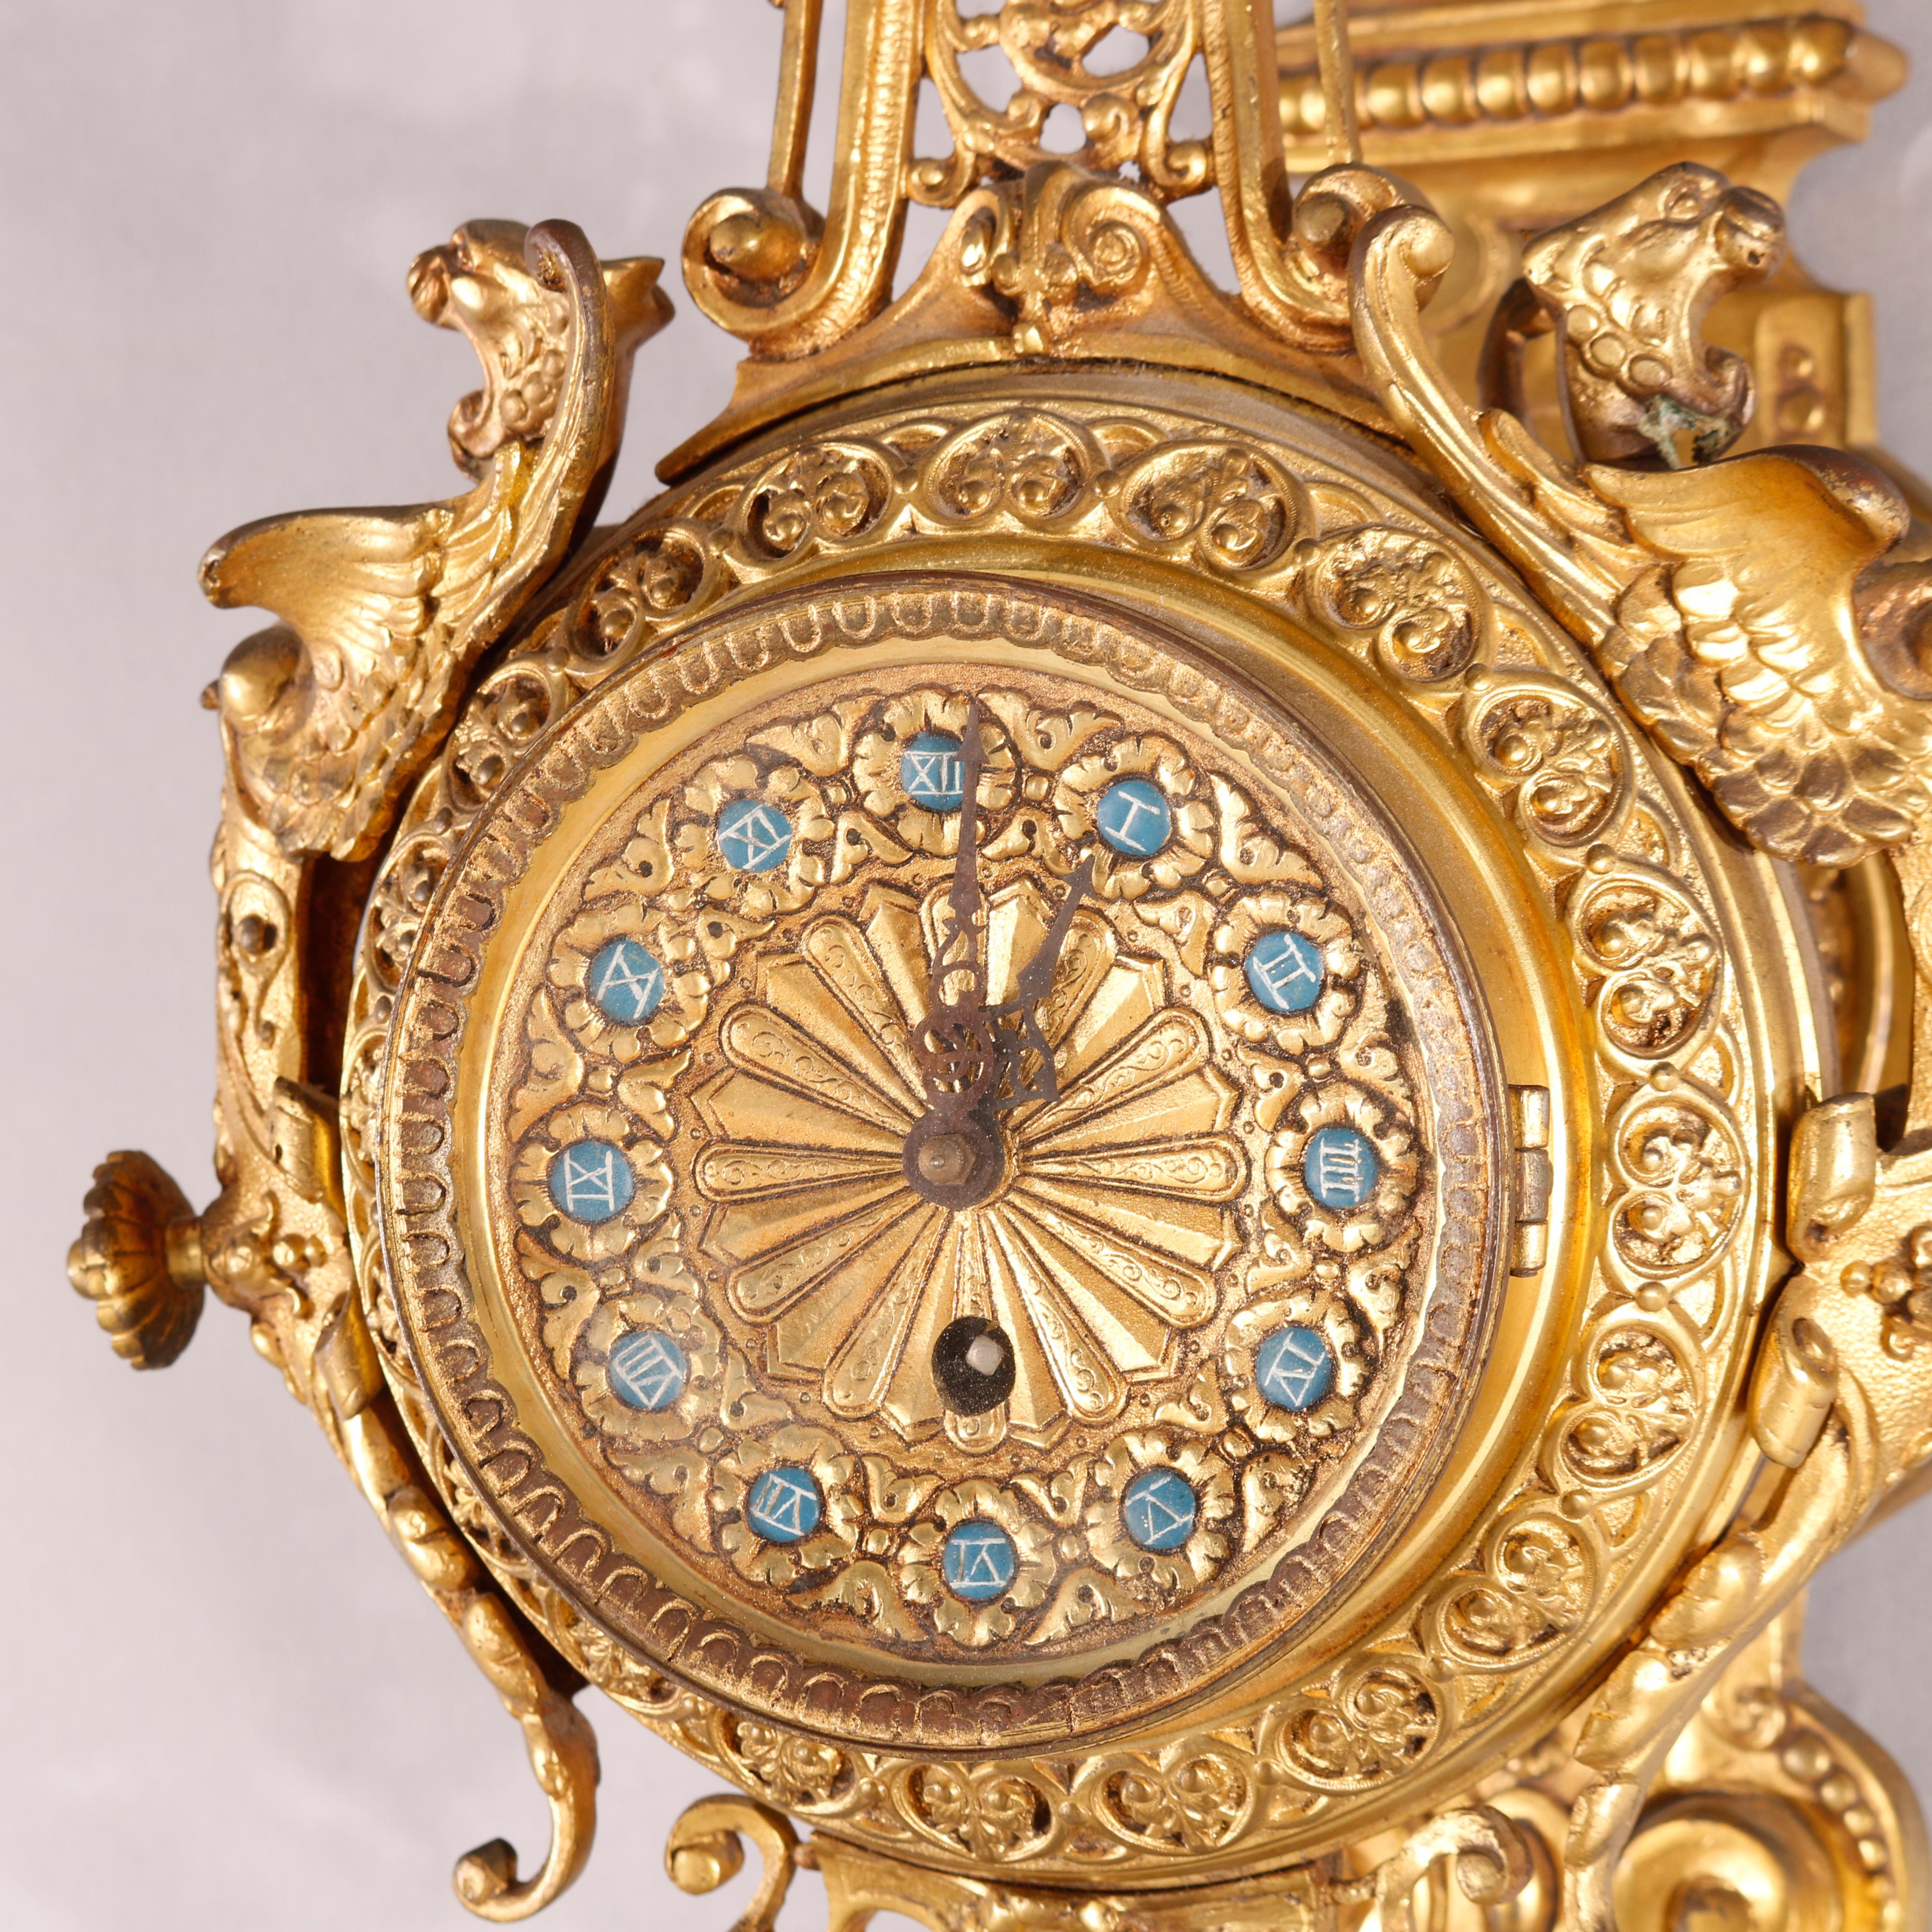 An antique French Empire style hanging clock offers gilt bronze construction with scroll and foliate elements throughout as well as flanking figural griffins on case, non-working, circa 1880

Measures - 31